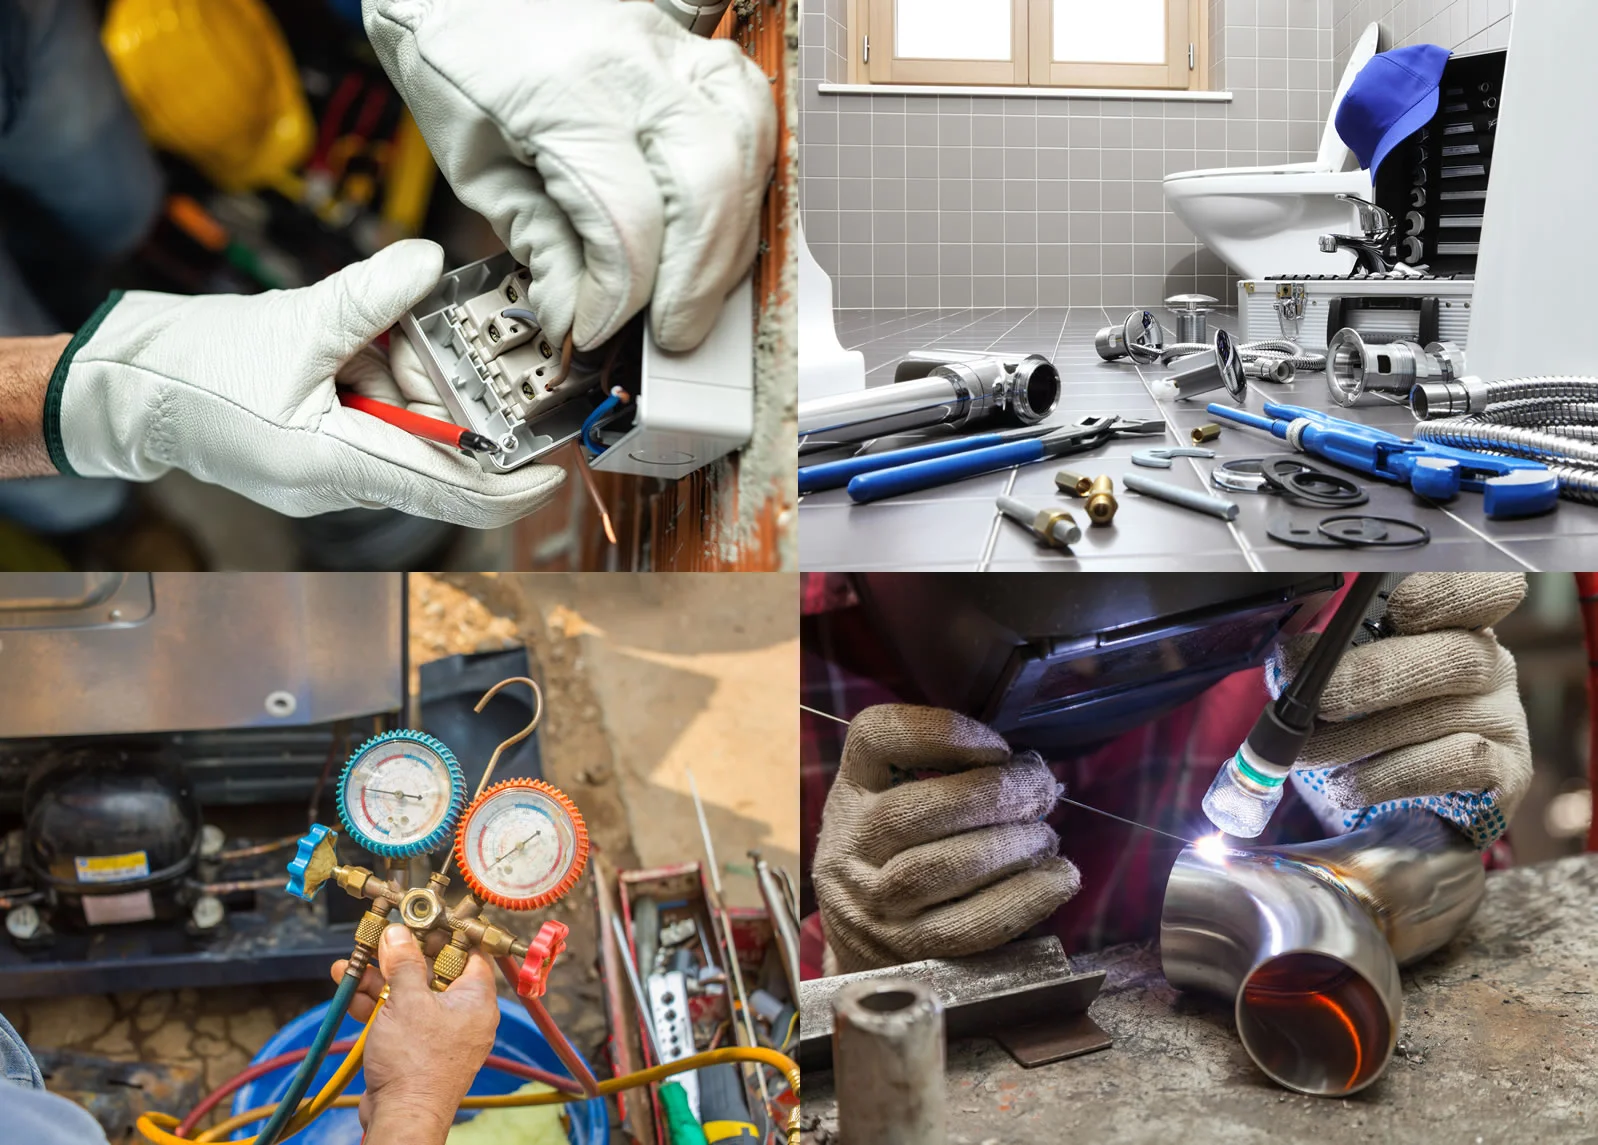 Apprenticeship Trades include electrical, HVAC, Pipe Fitting & Plumbing